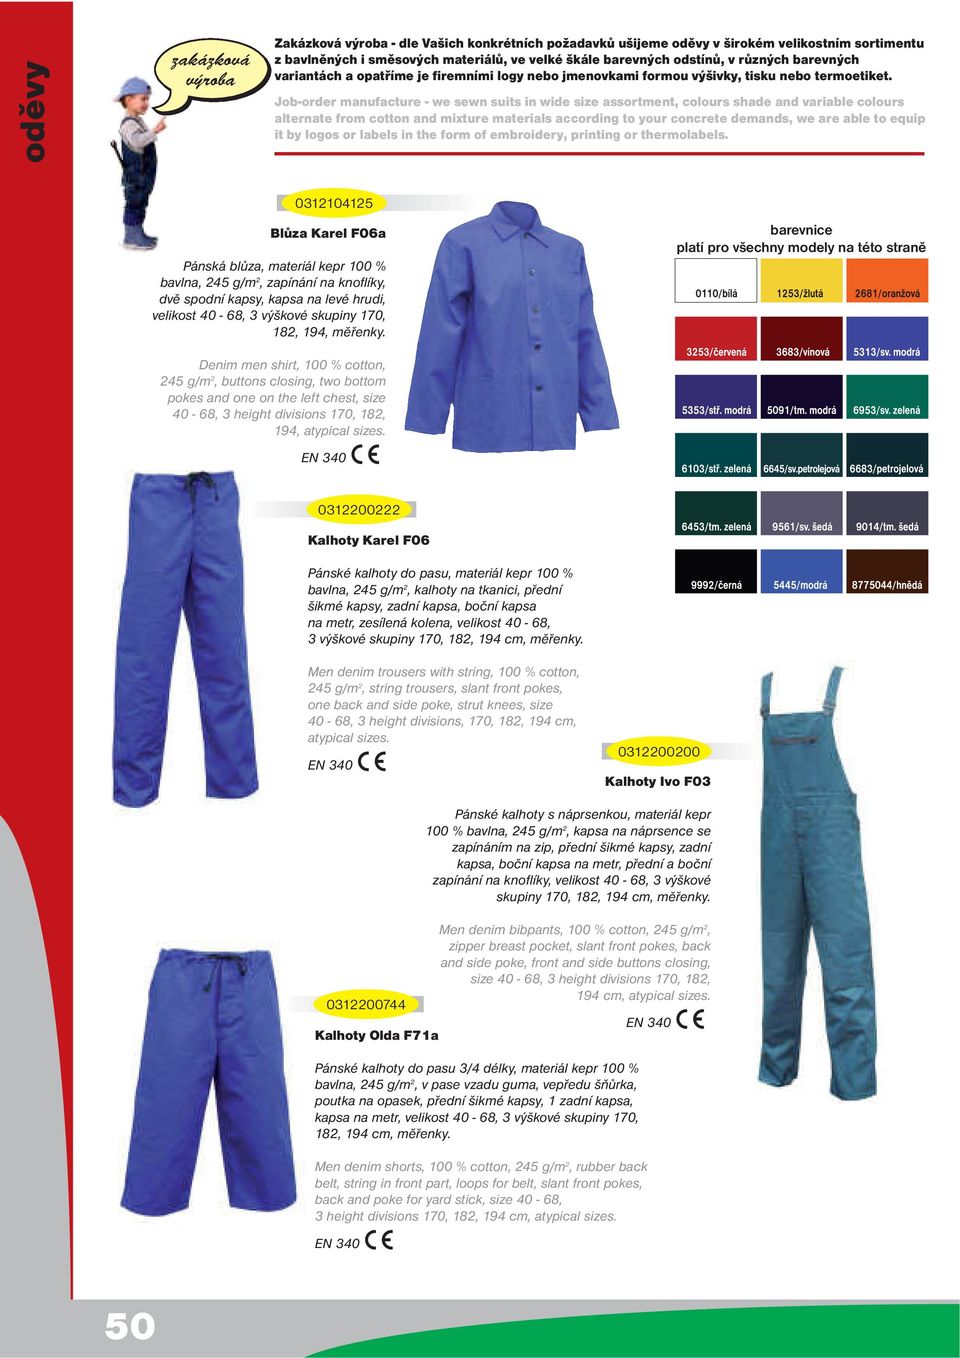 Job-order manufacture - we sewn suits in wide size assortment, colours shade and variable colours alternate from cotton and mixture materials according to your concrete demands, we are able to equip